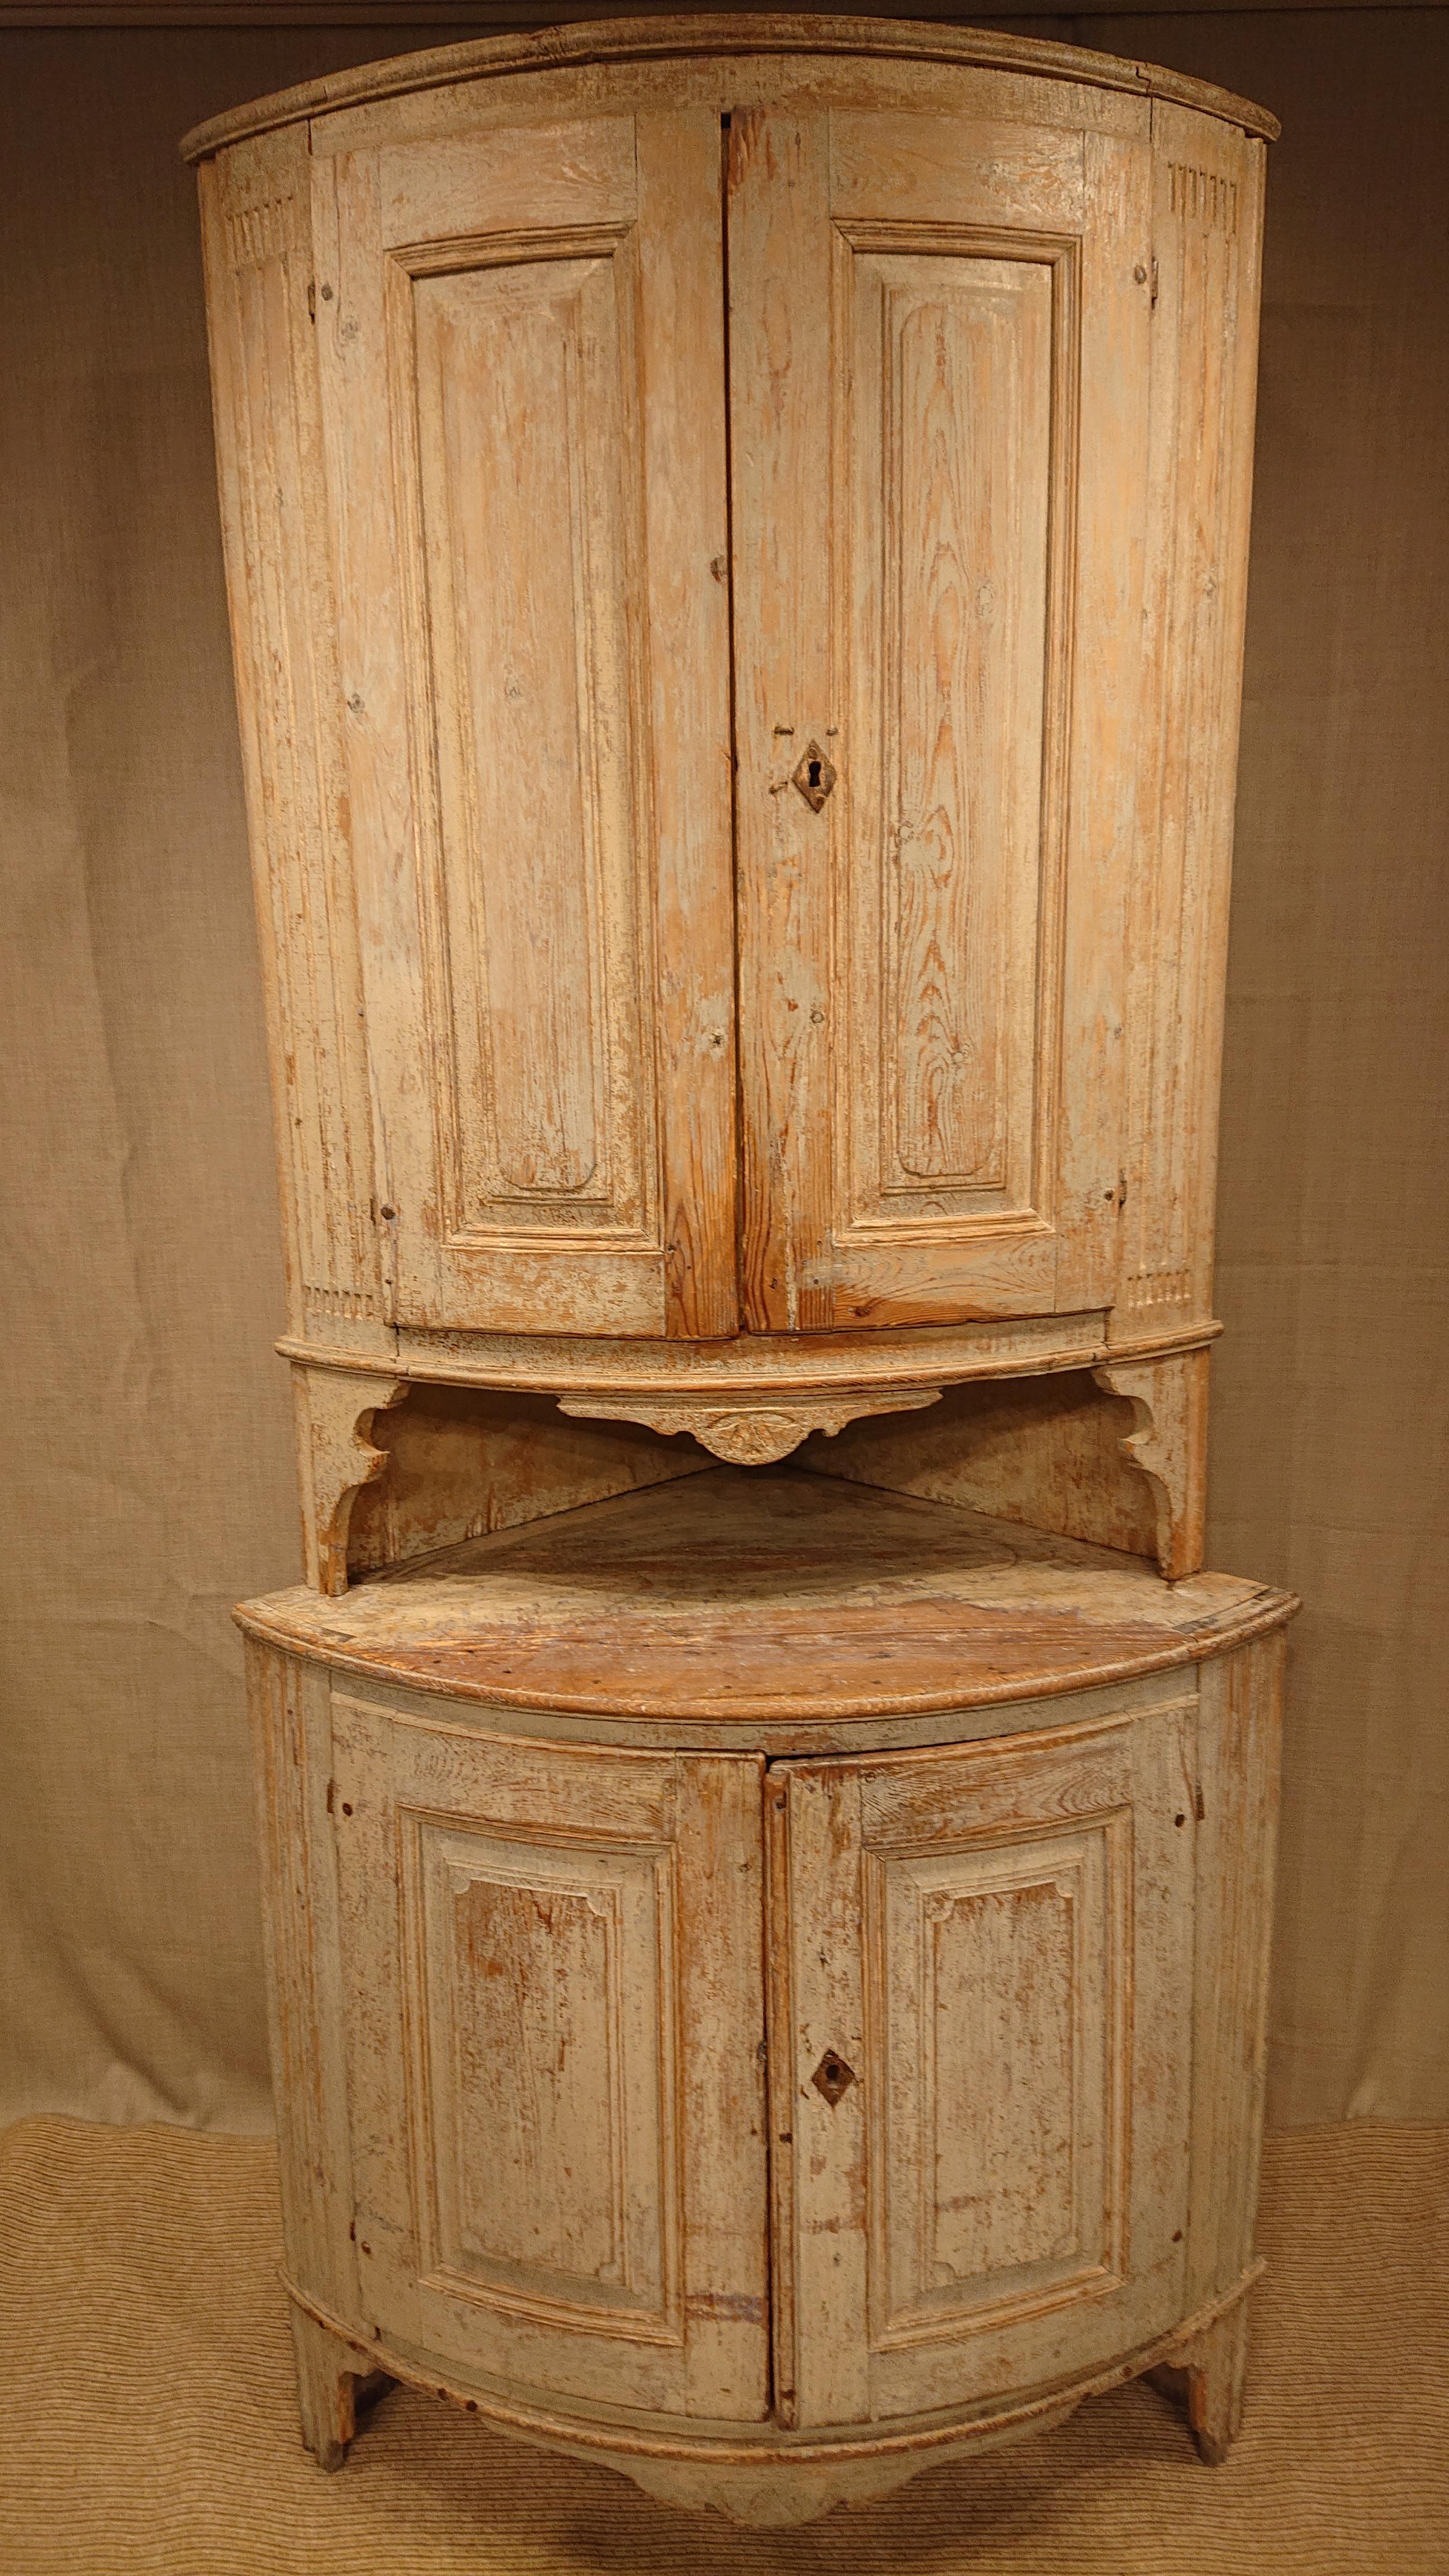 19th century Swedish Gustavian Corner Cabinet from Boden Norrbotten, Northern Sweden.
Note!!! See the correct dimensions of the Corner Cabinet below in the text!!!!
Fantastic fine Corner Cabinet with beautiful carved and ribbed details.
Scraped by